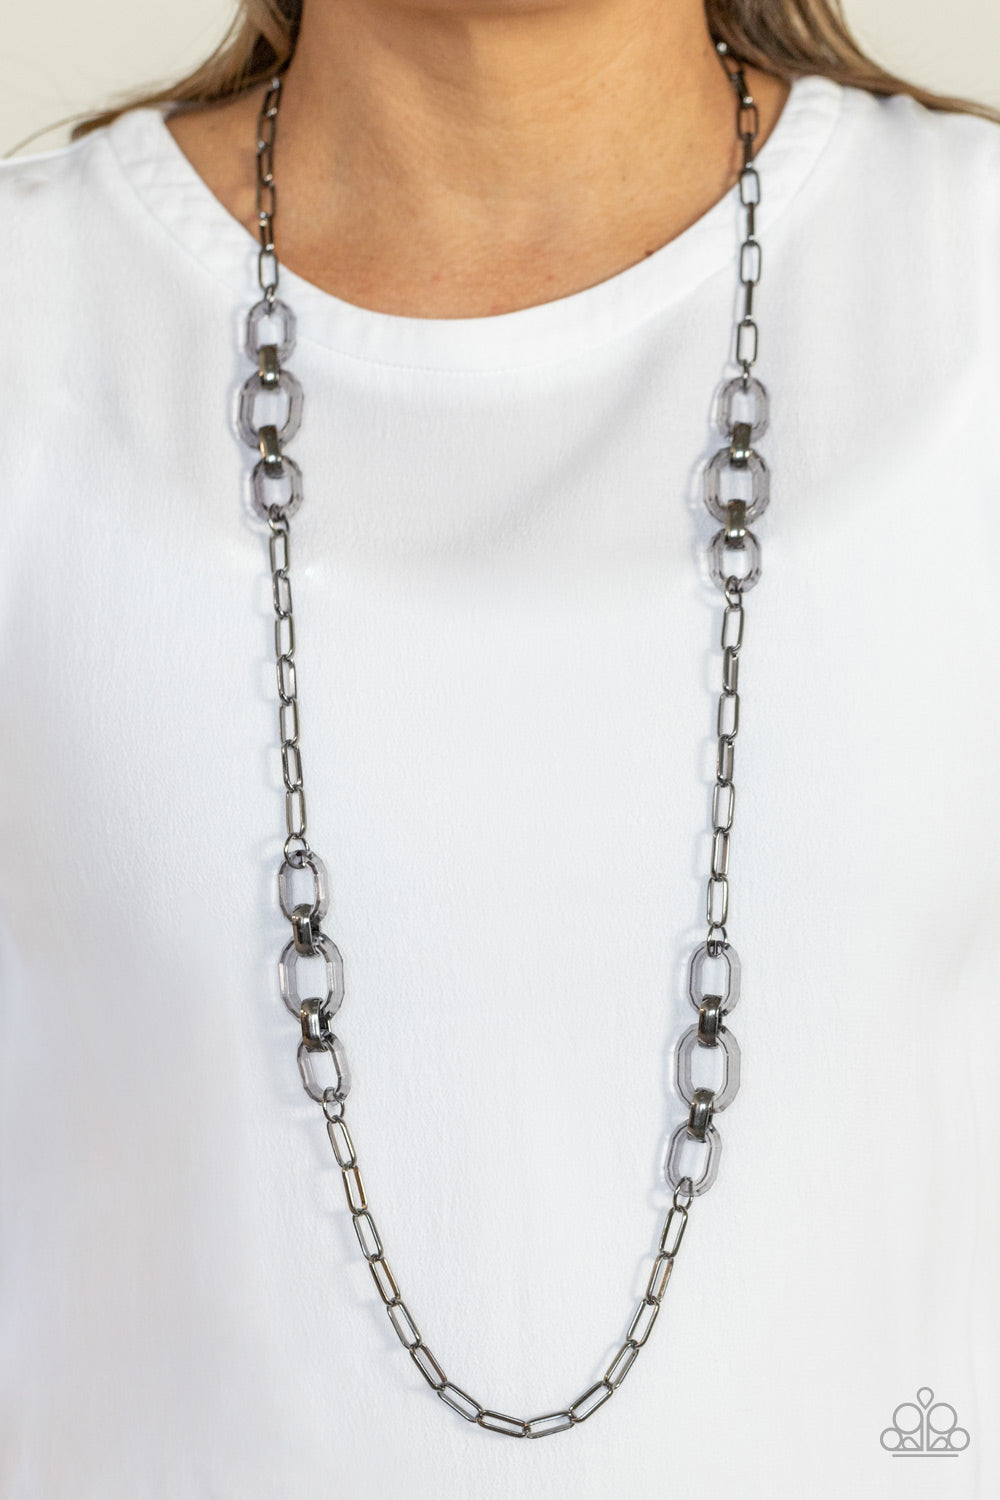 Paparazzi Necklaces - Have I Made Myself Clear? - Black